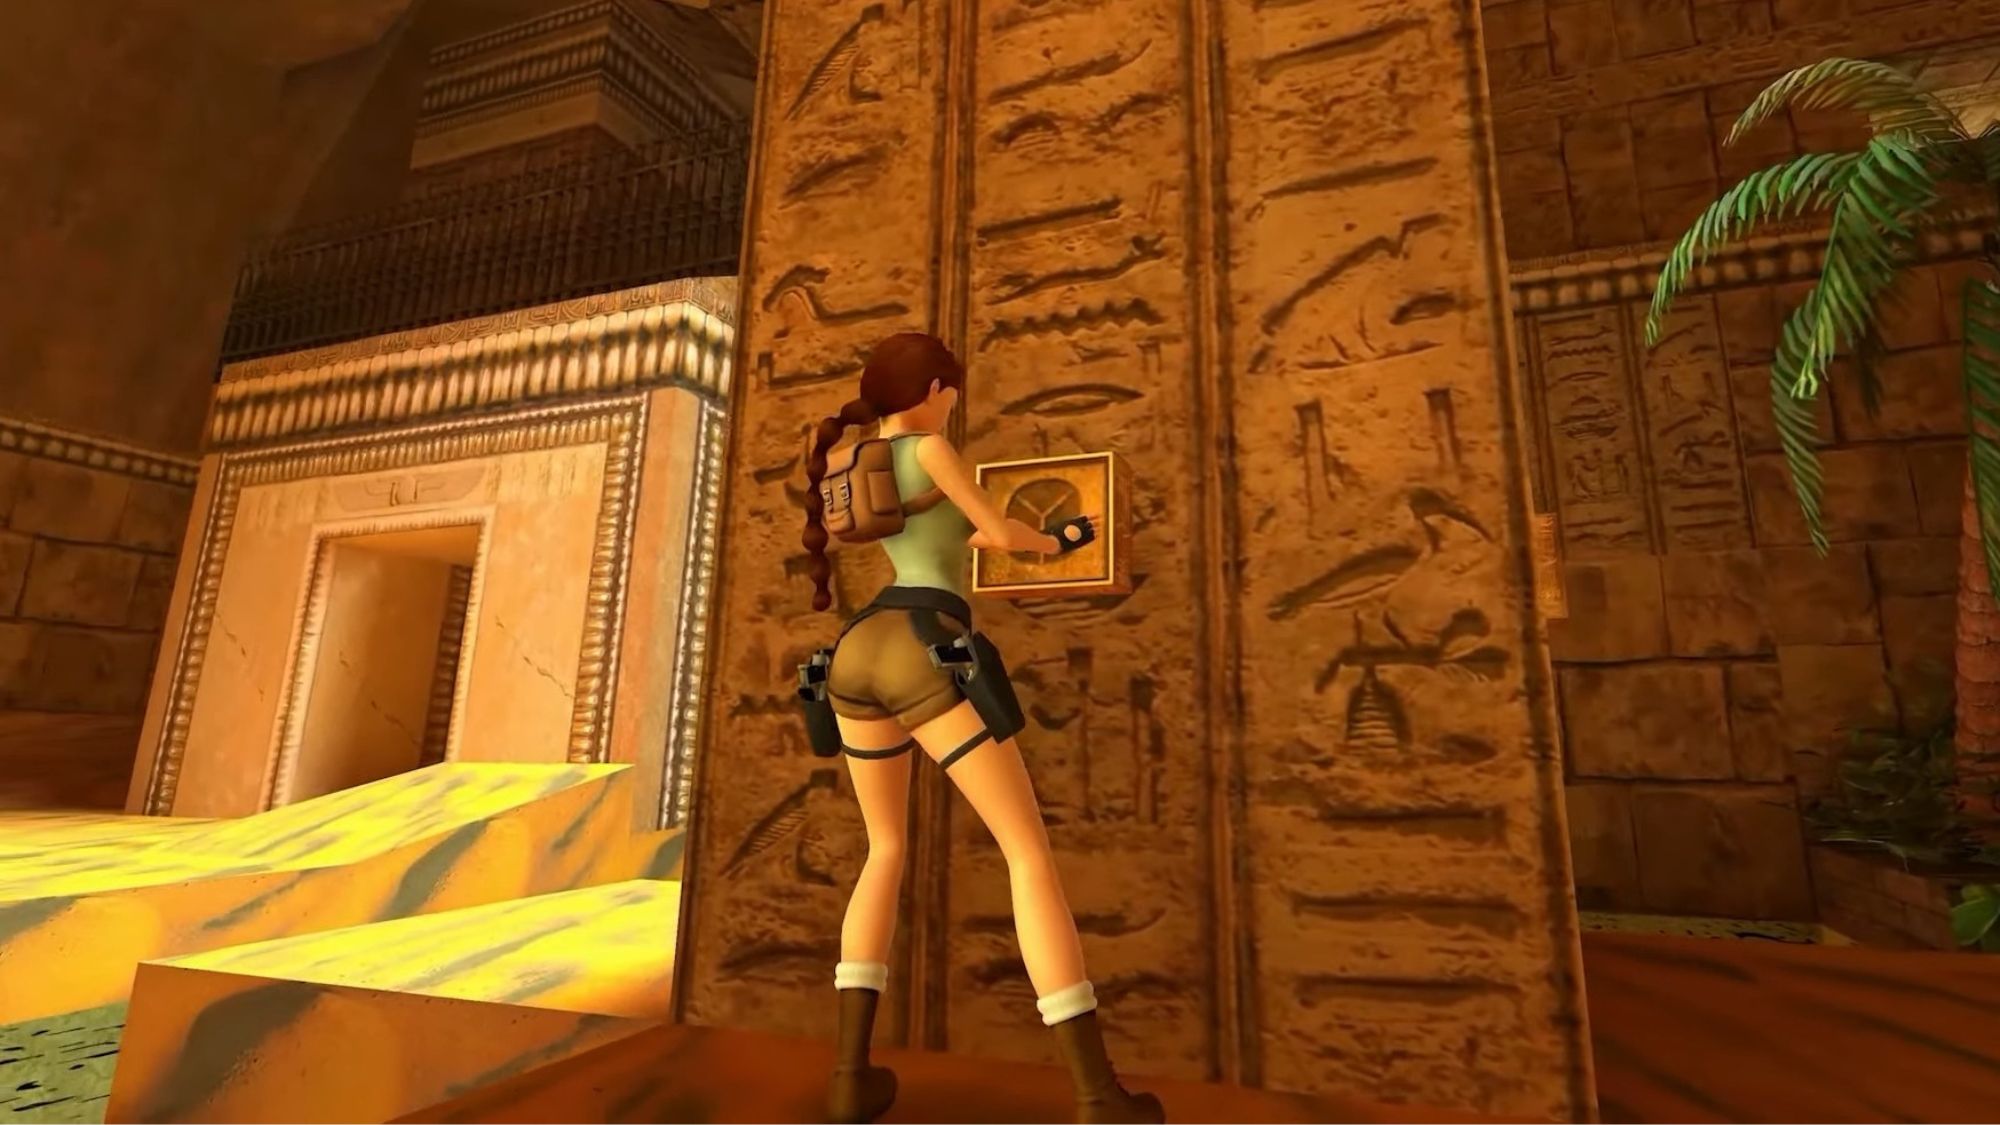 Tomb Raider 1-3 Remastered trilogy is coming to PlayStation and